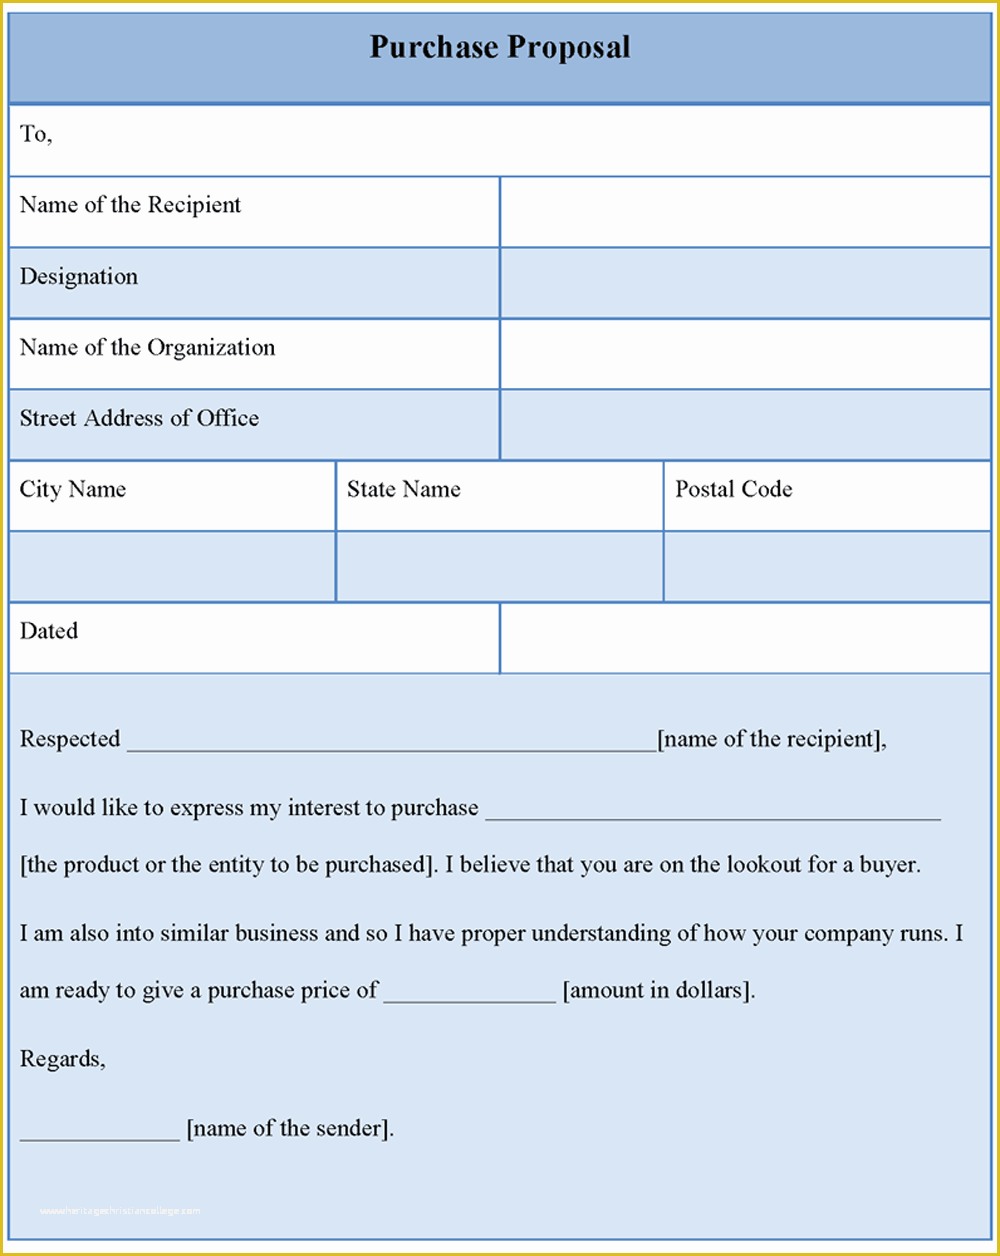 Microsoft Word Proposal Template Free Download Of Free Proposal Template